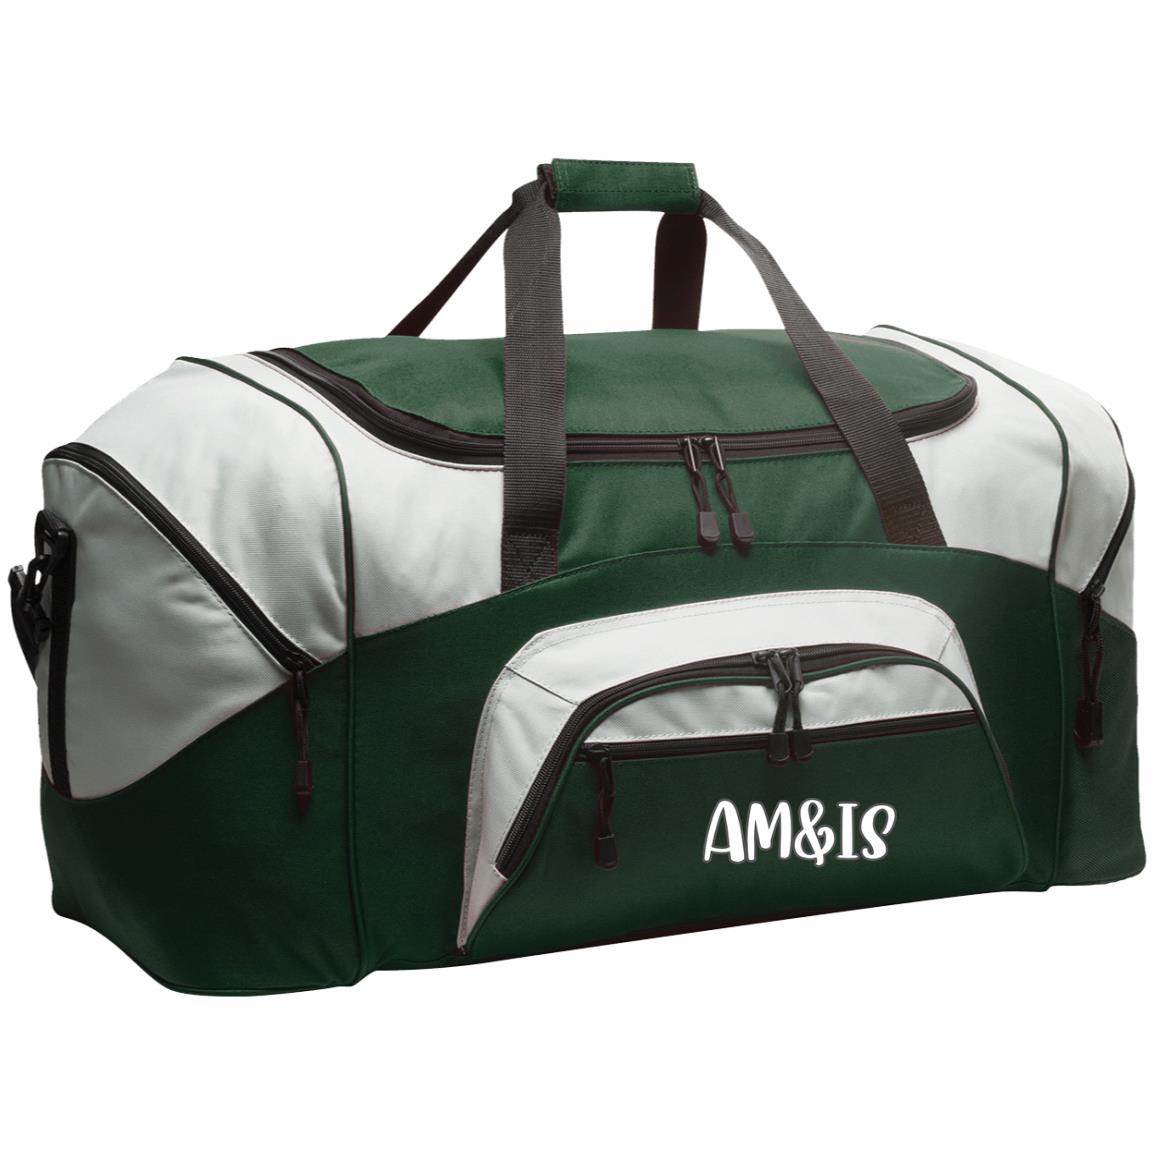 HUNTER GREEN GRAY ONE SIZE - AM&IS Activewear Colorblock Sport Duffel - duffel bag at TFC&H Co.